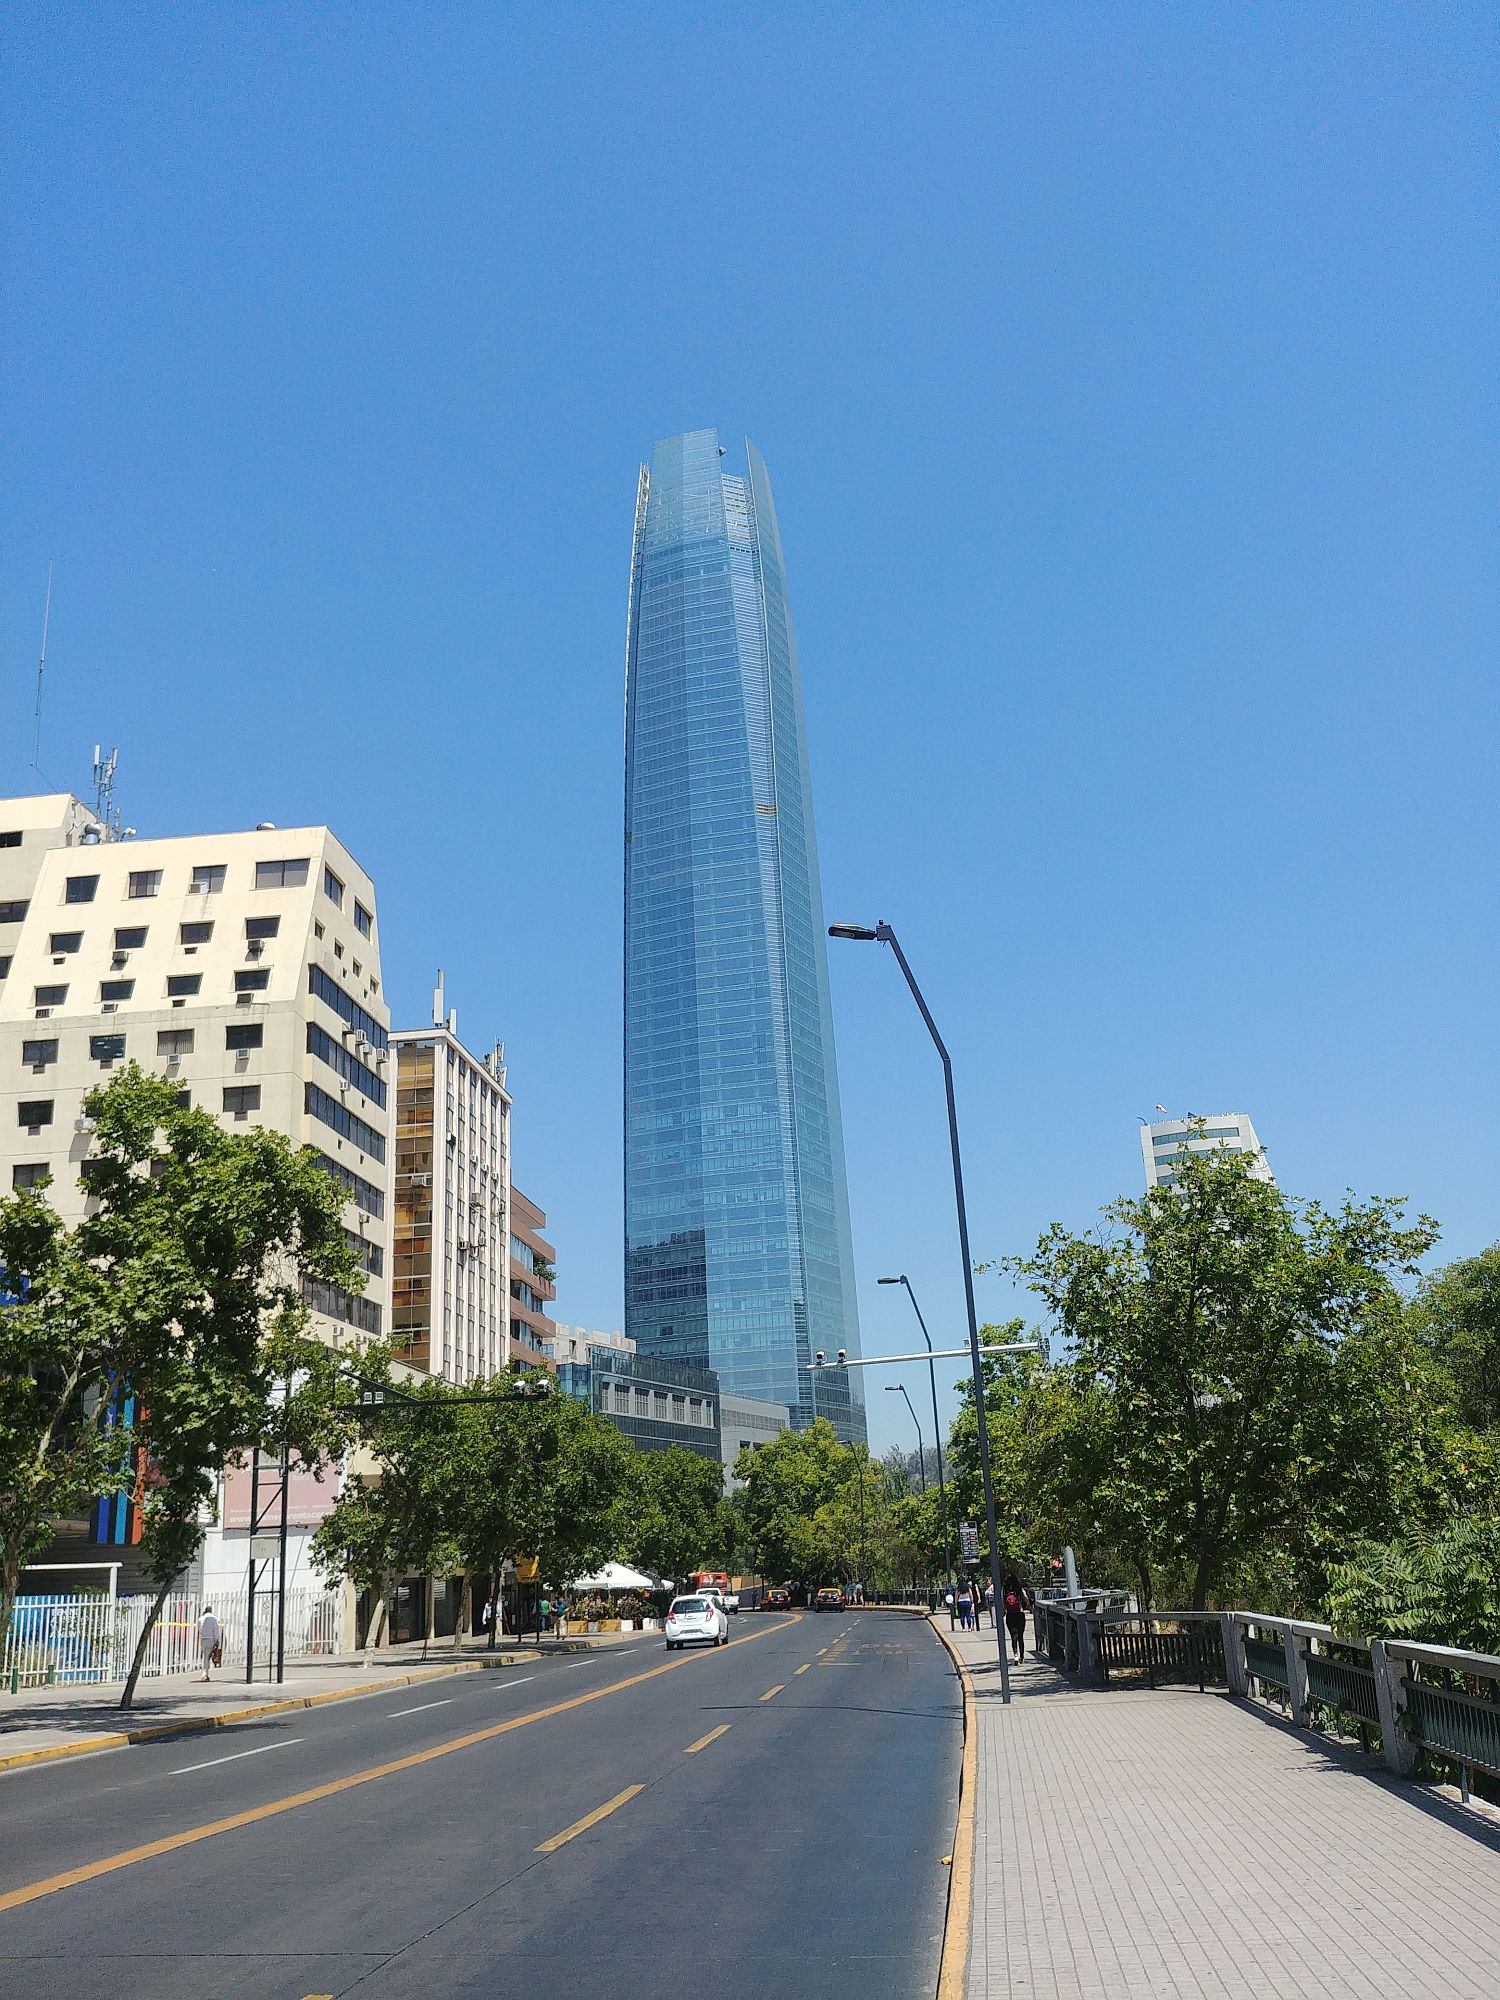 Santiago 04 - The tallest building in South America